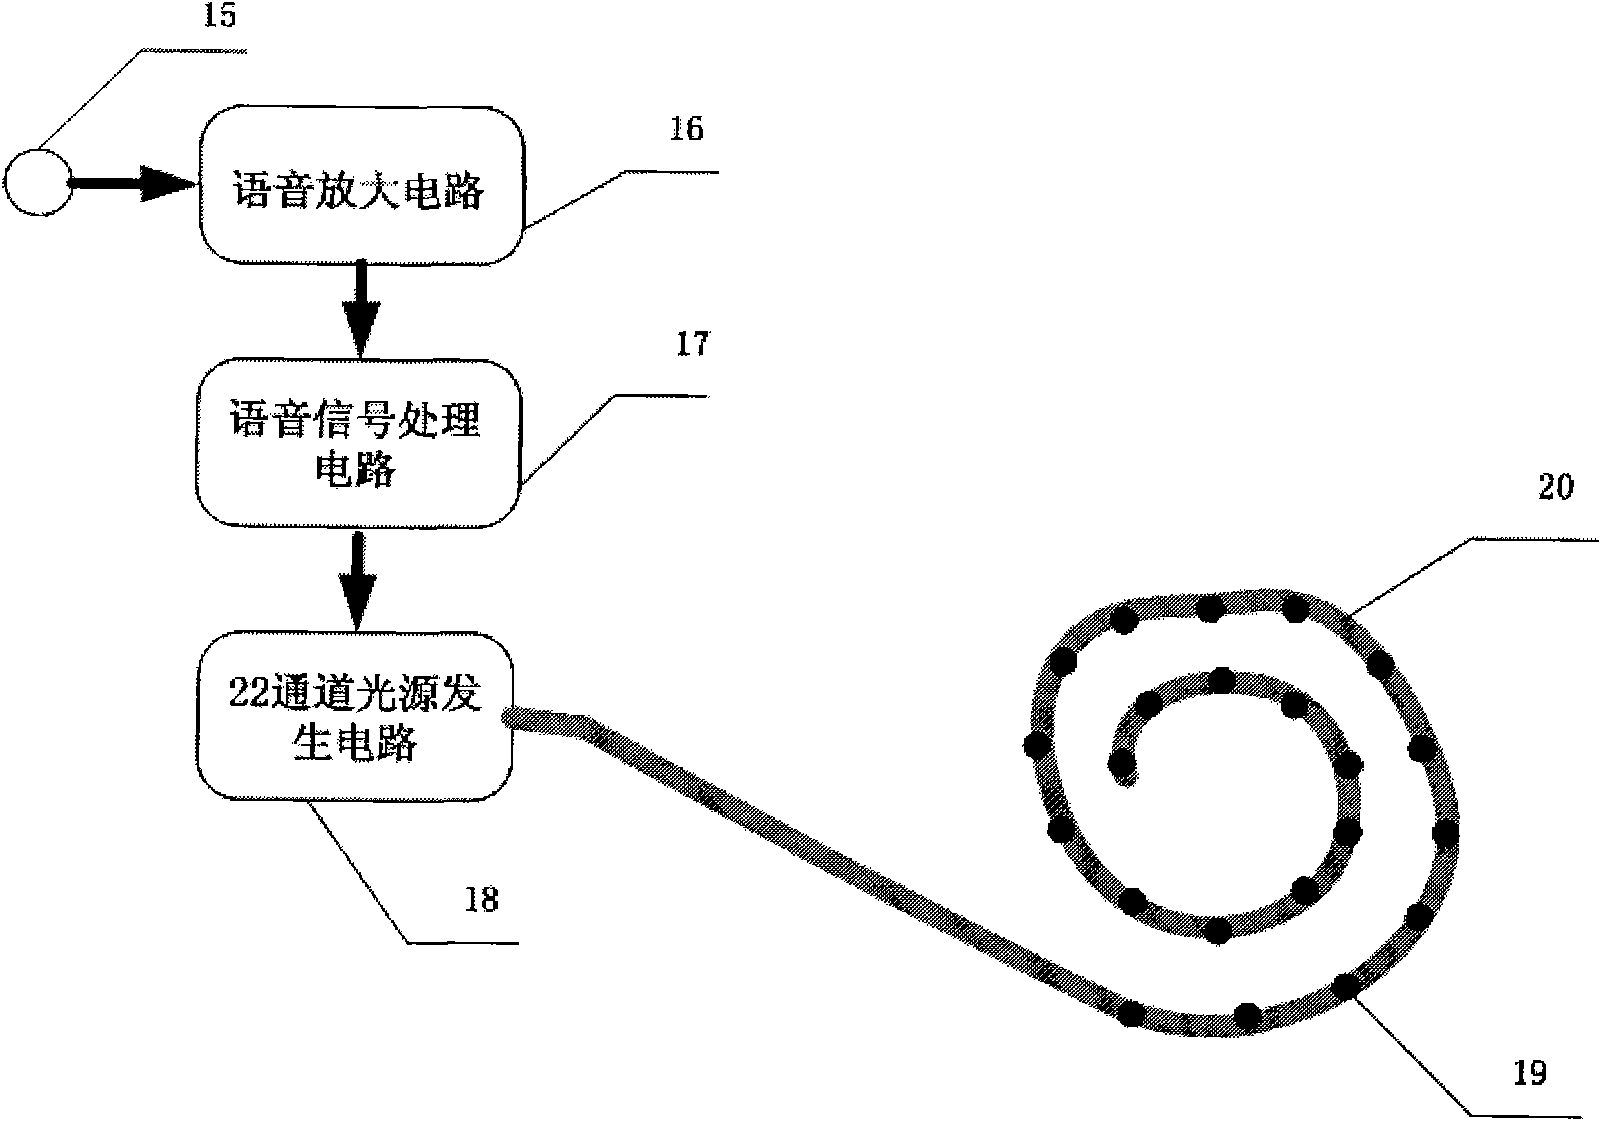 Multi-channel light stimulation-based cochlear implant device